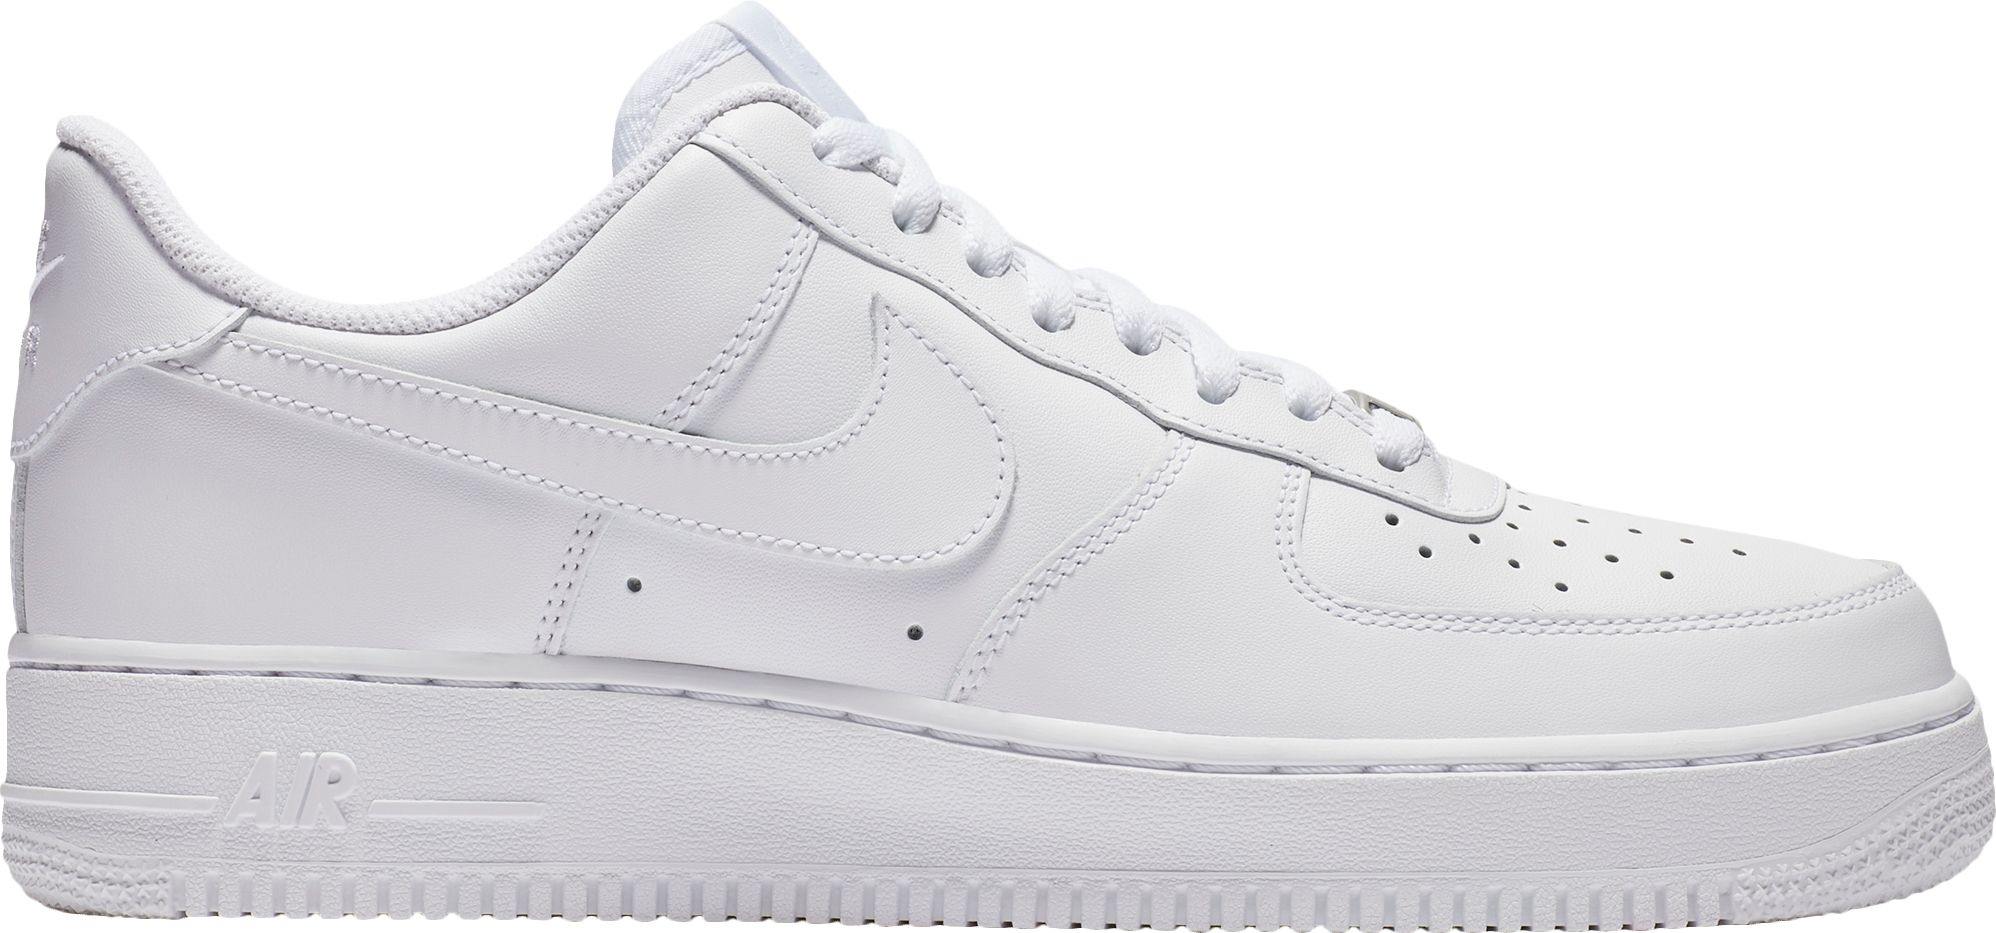 womens white nike air force 1 size 7.5